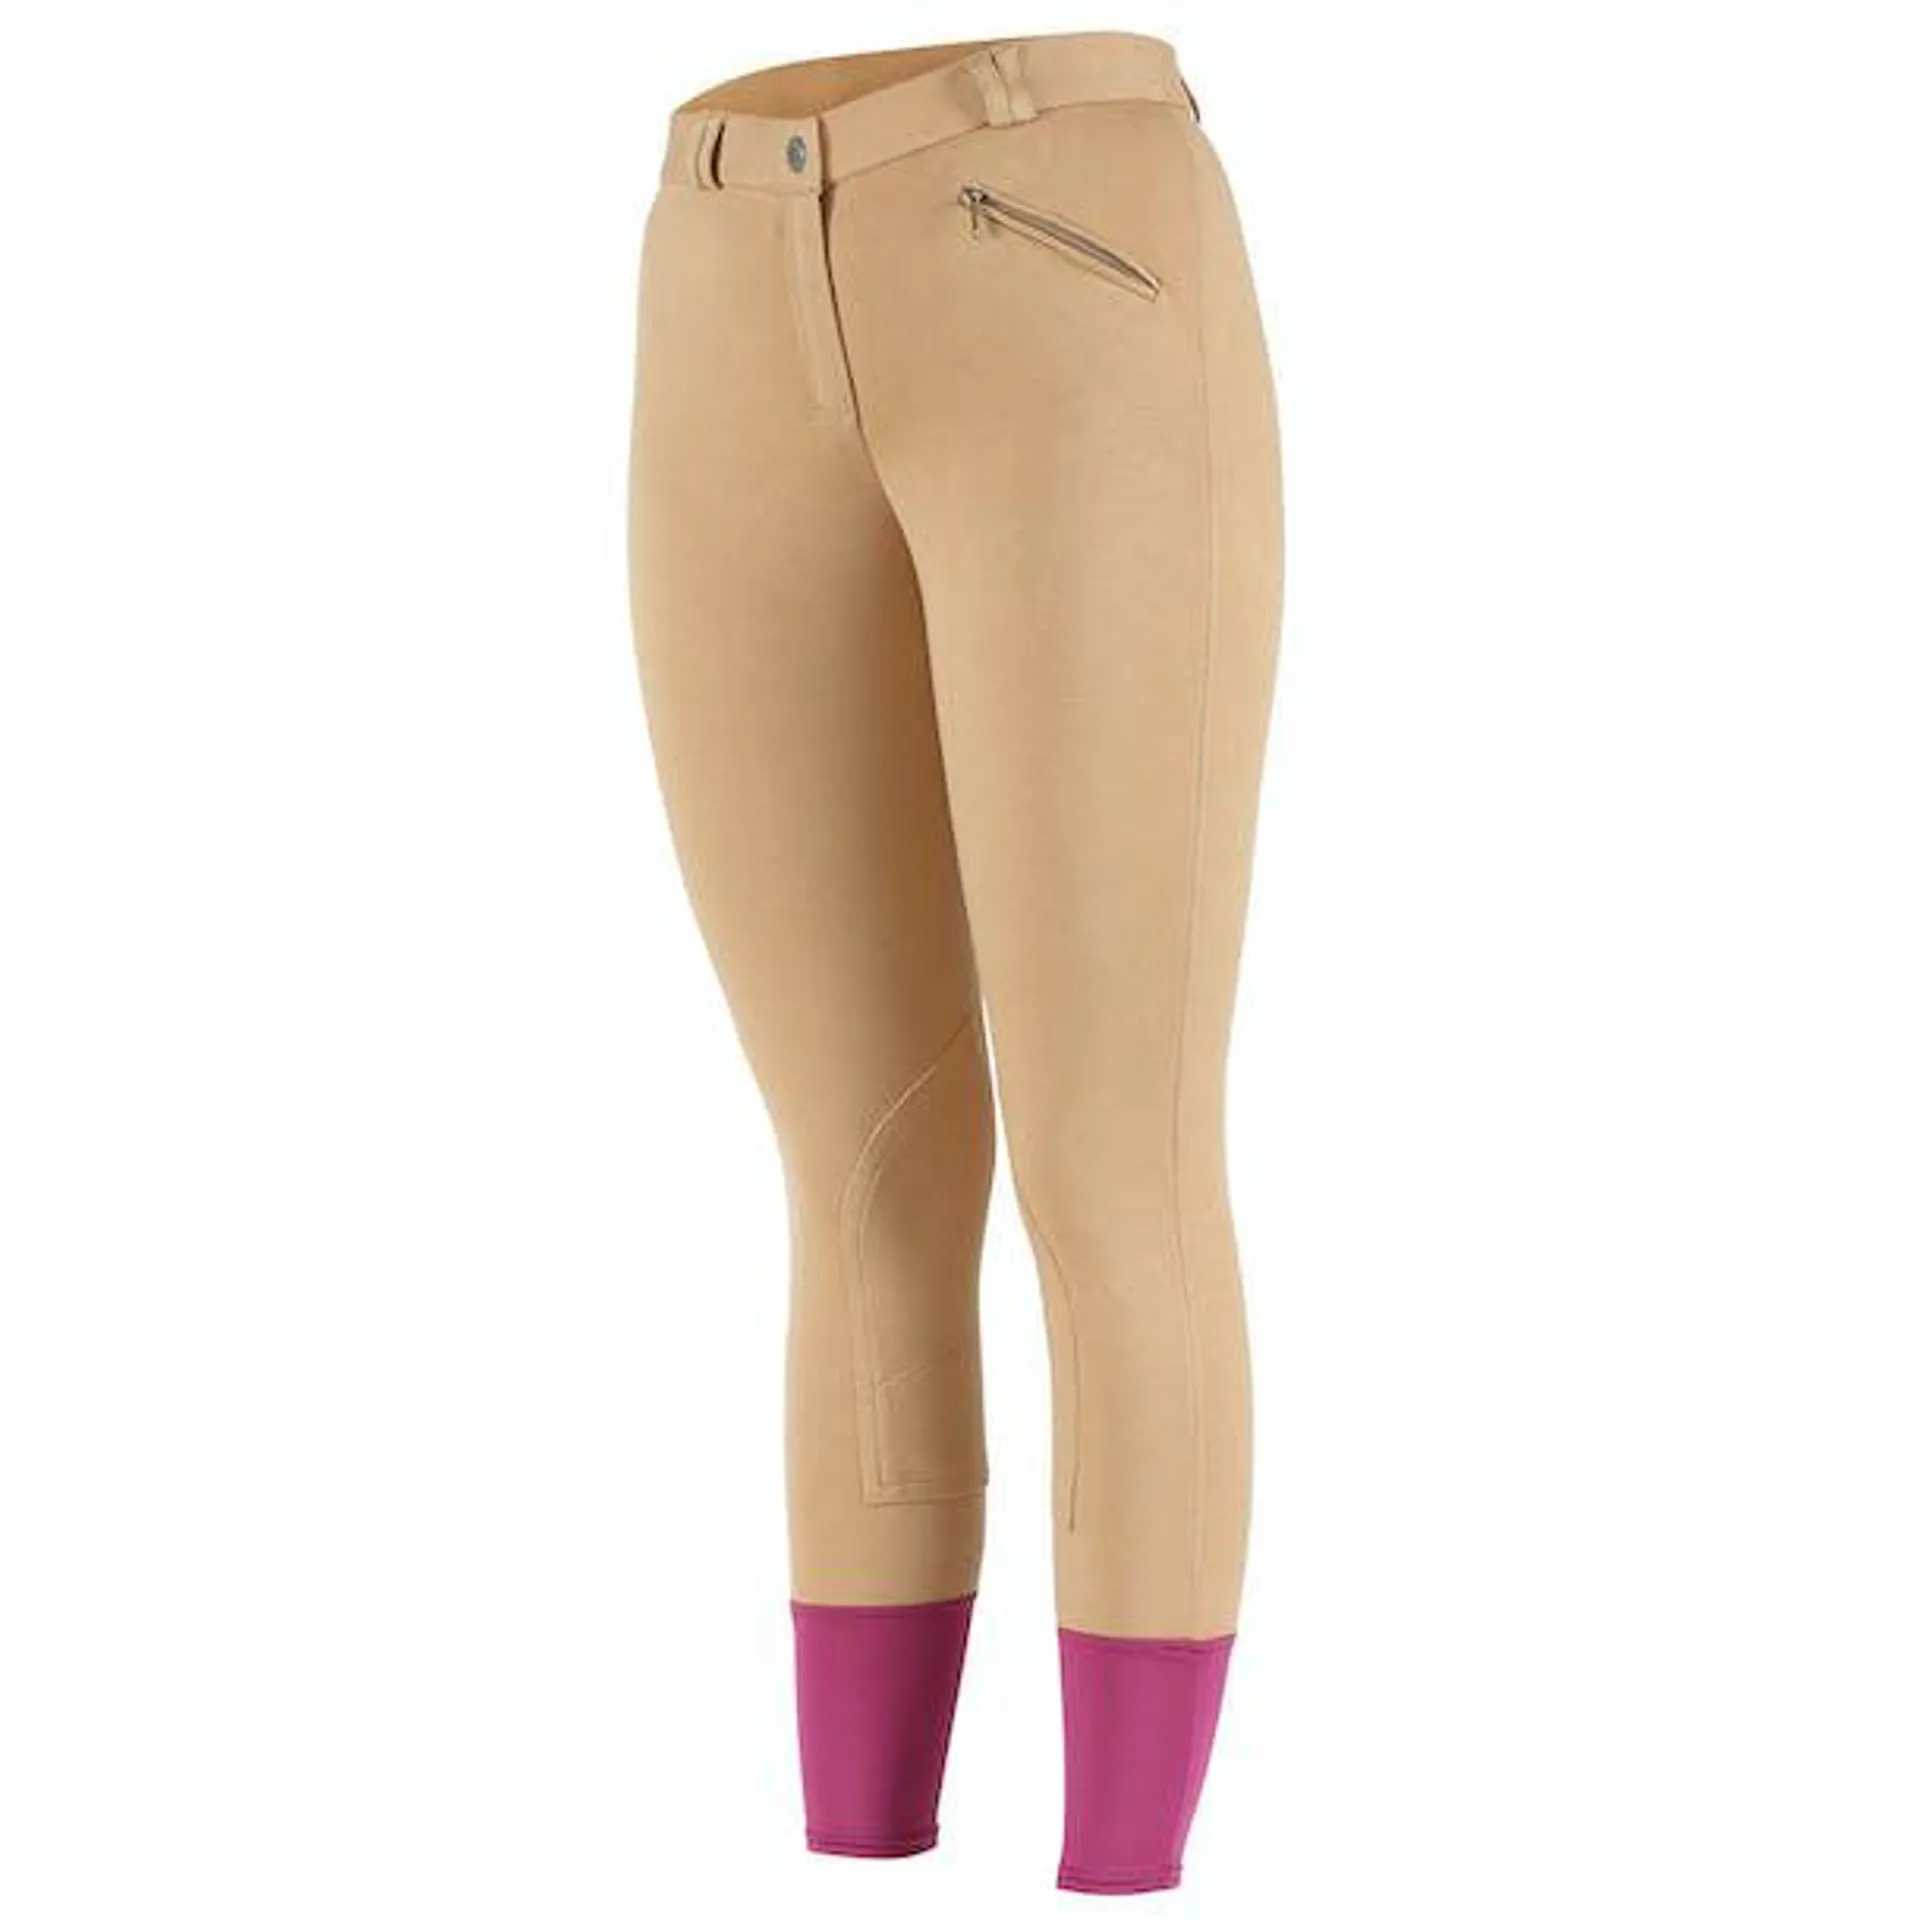 Shires Wessex Knitted Girls Riding Breeches